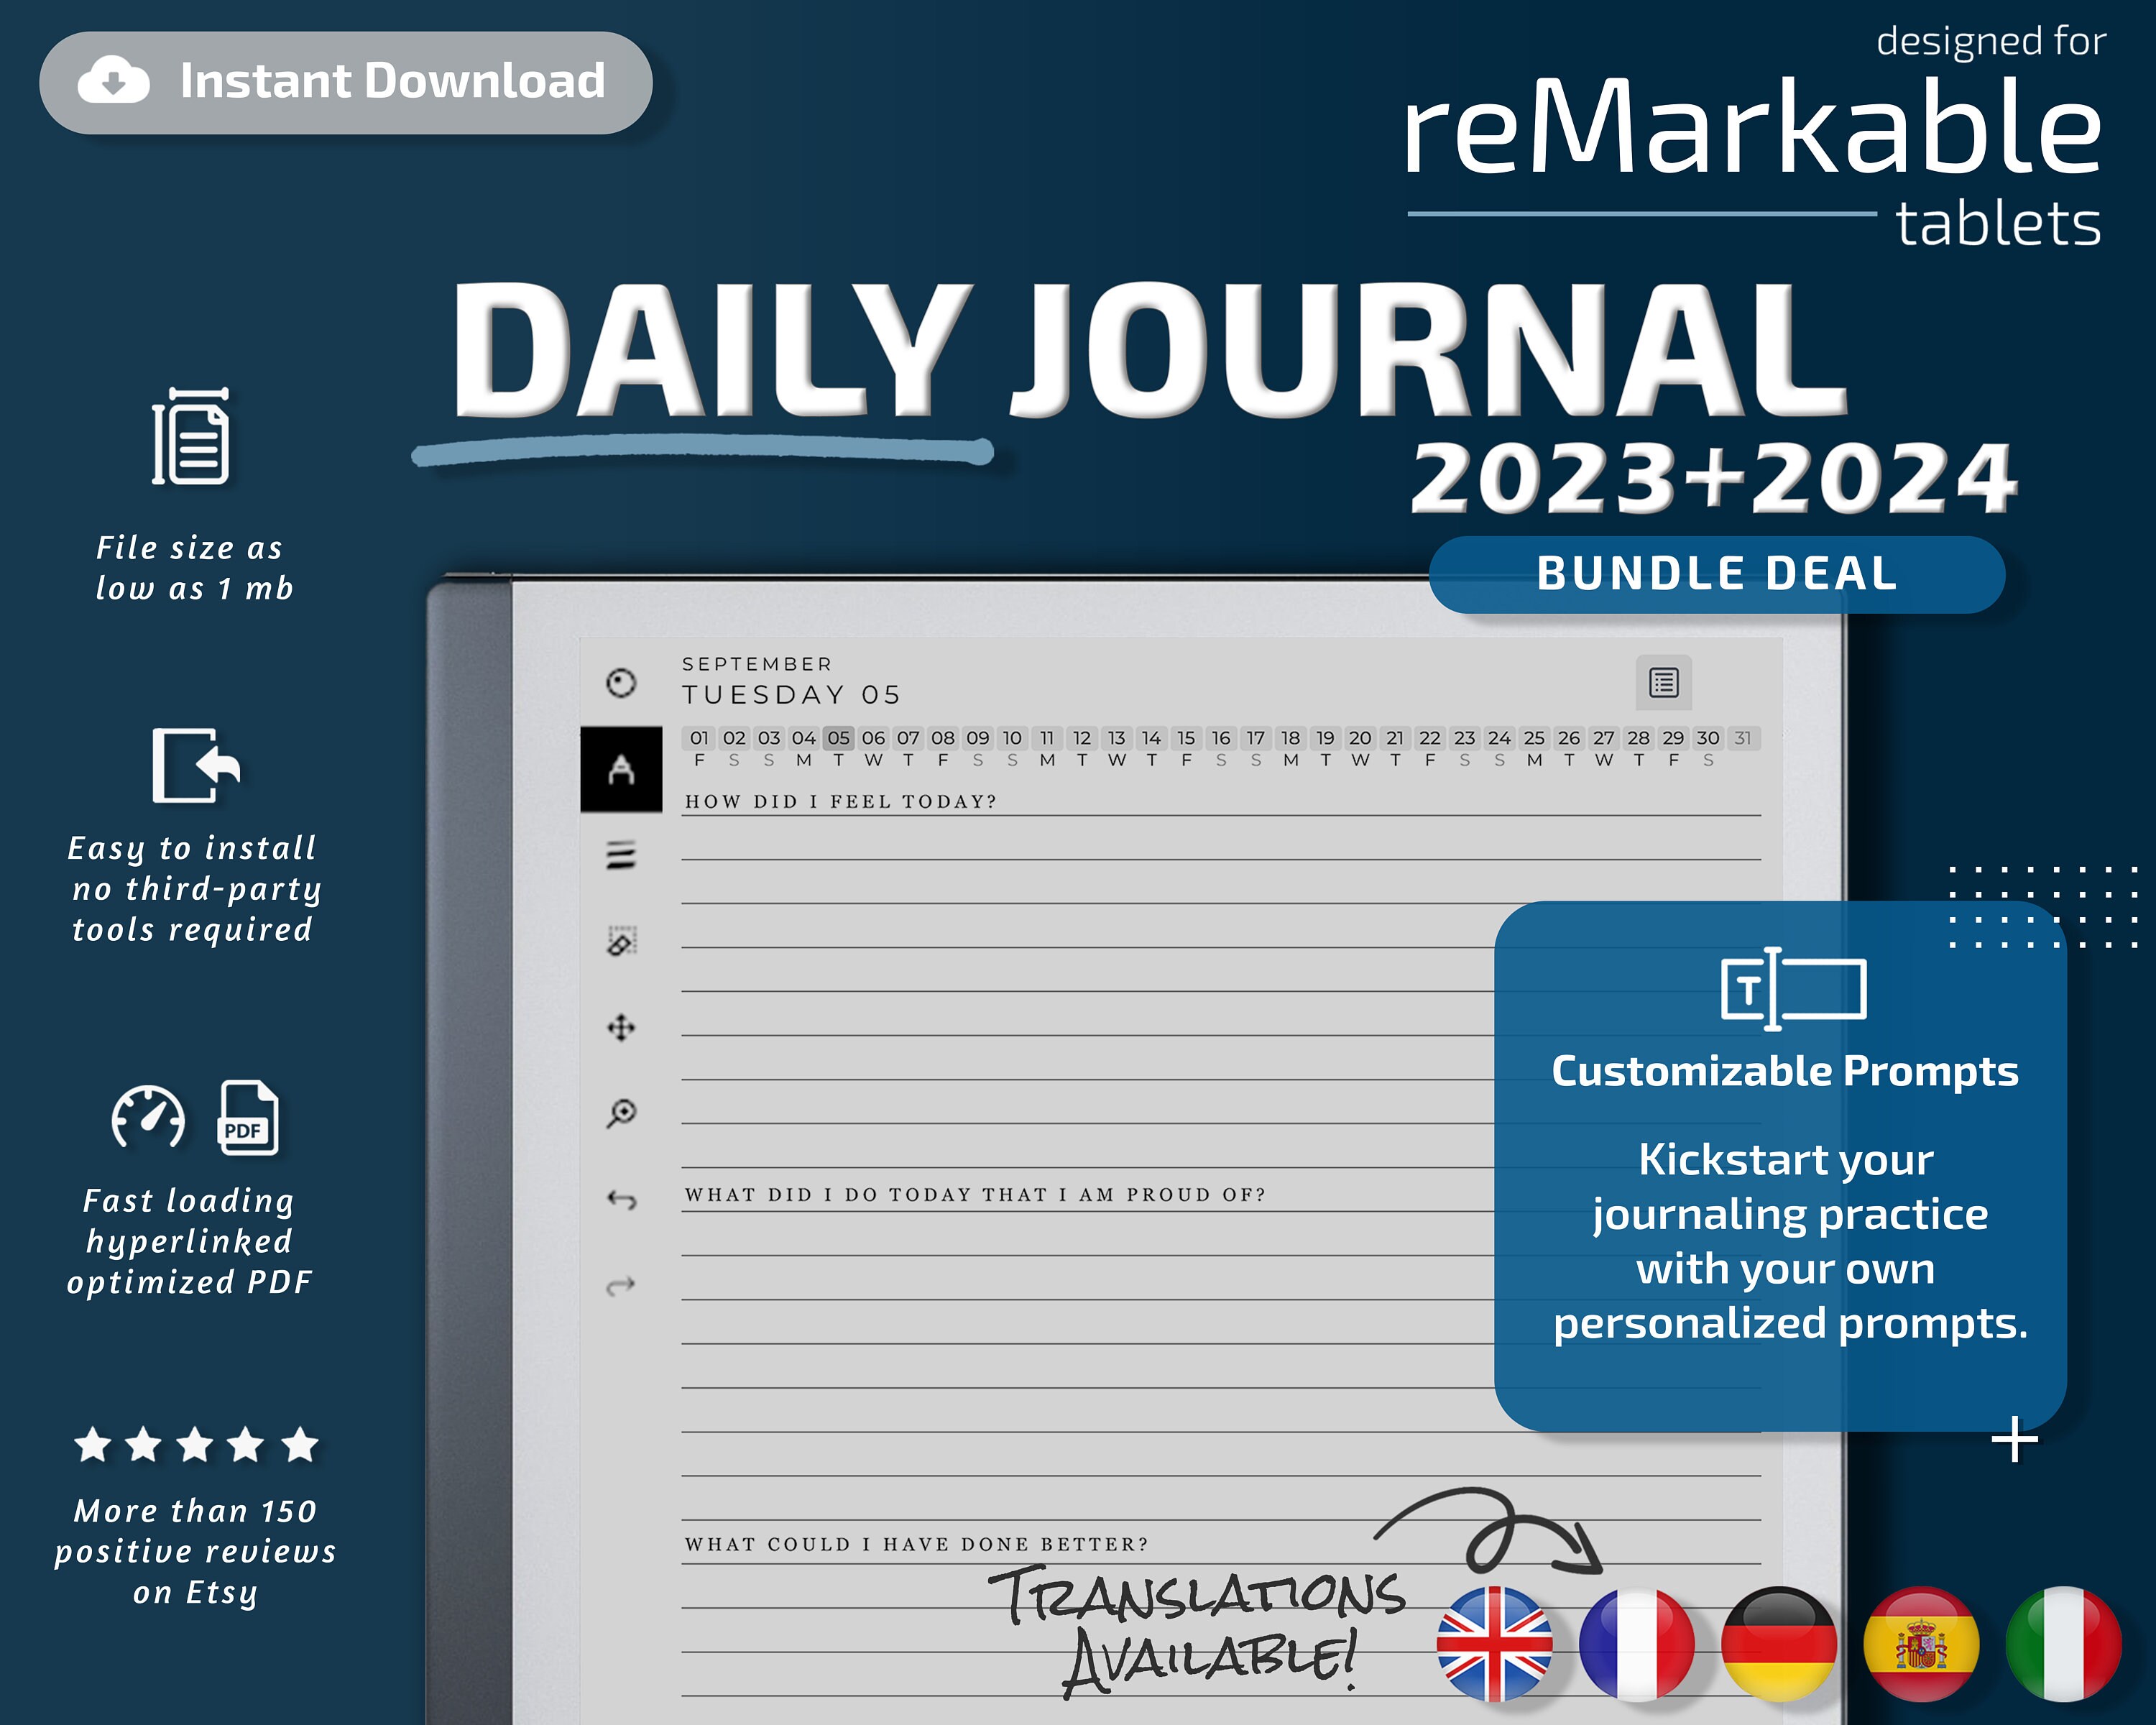 Daily Journal for Remarkable 2 2023 2024 Remarkable 2